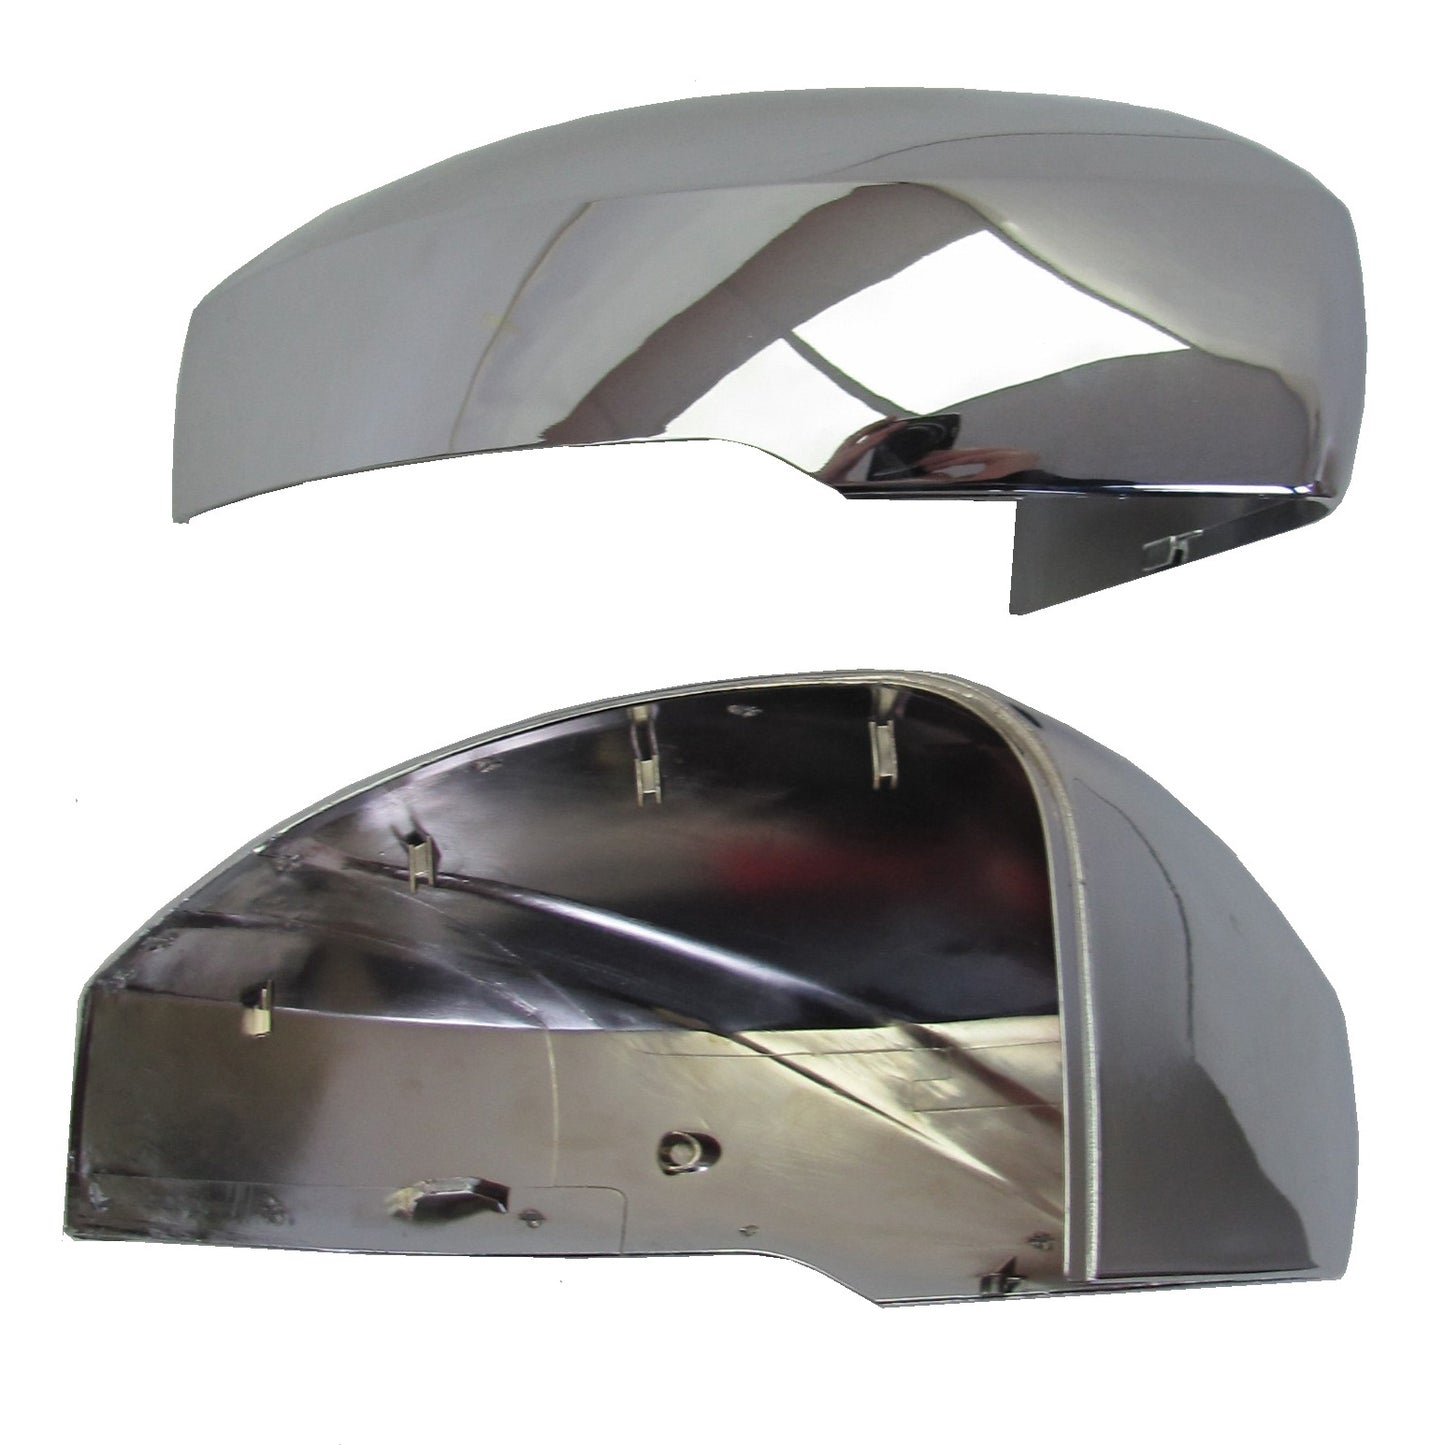 Mirror Covers - Top Half Caps for Land Rover Discovery 5 - Chrome